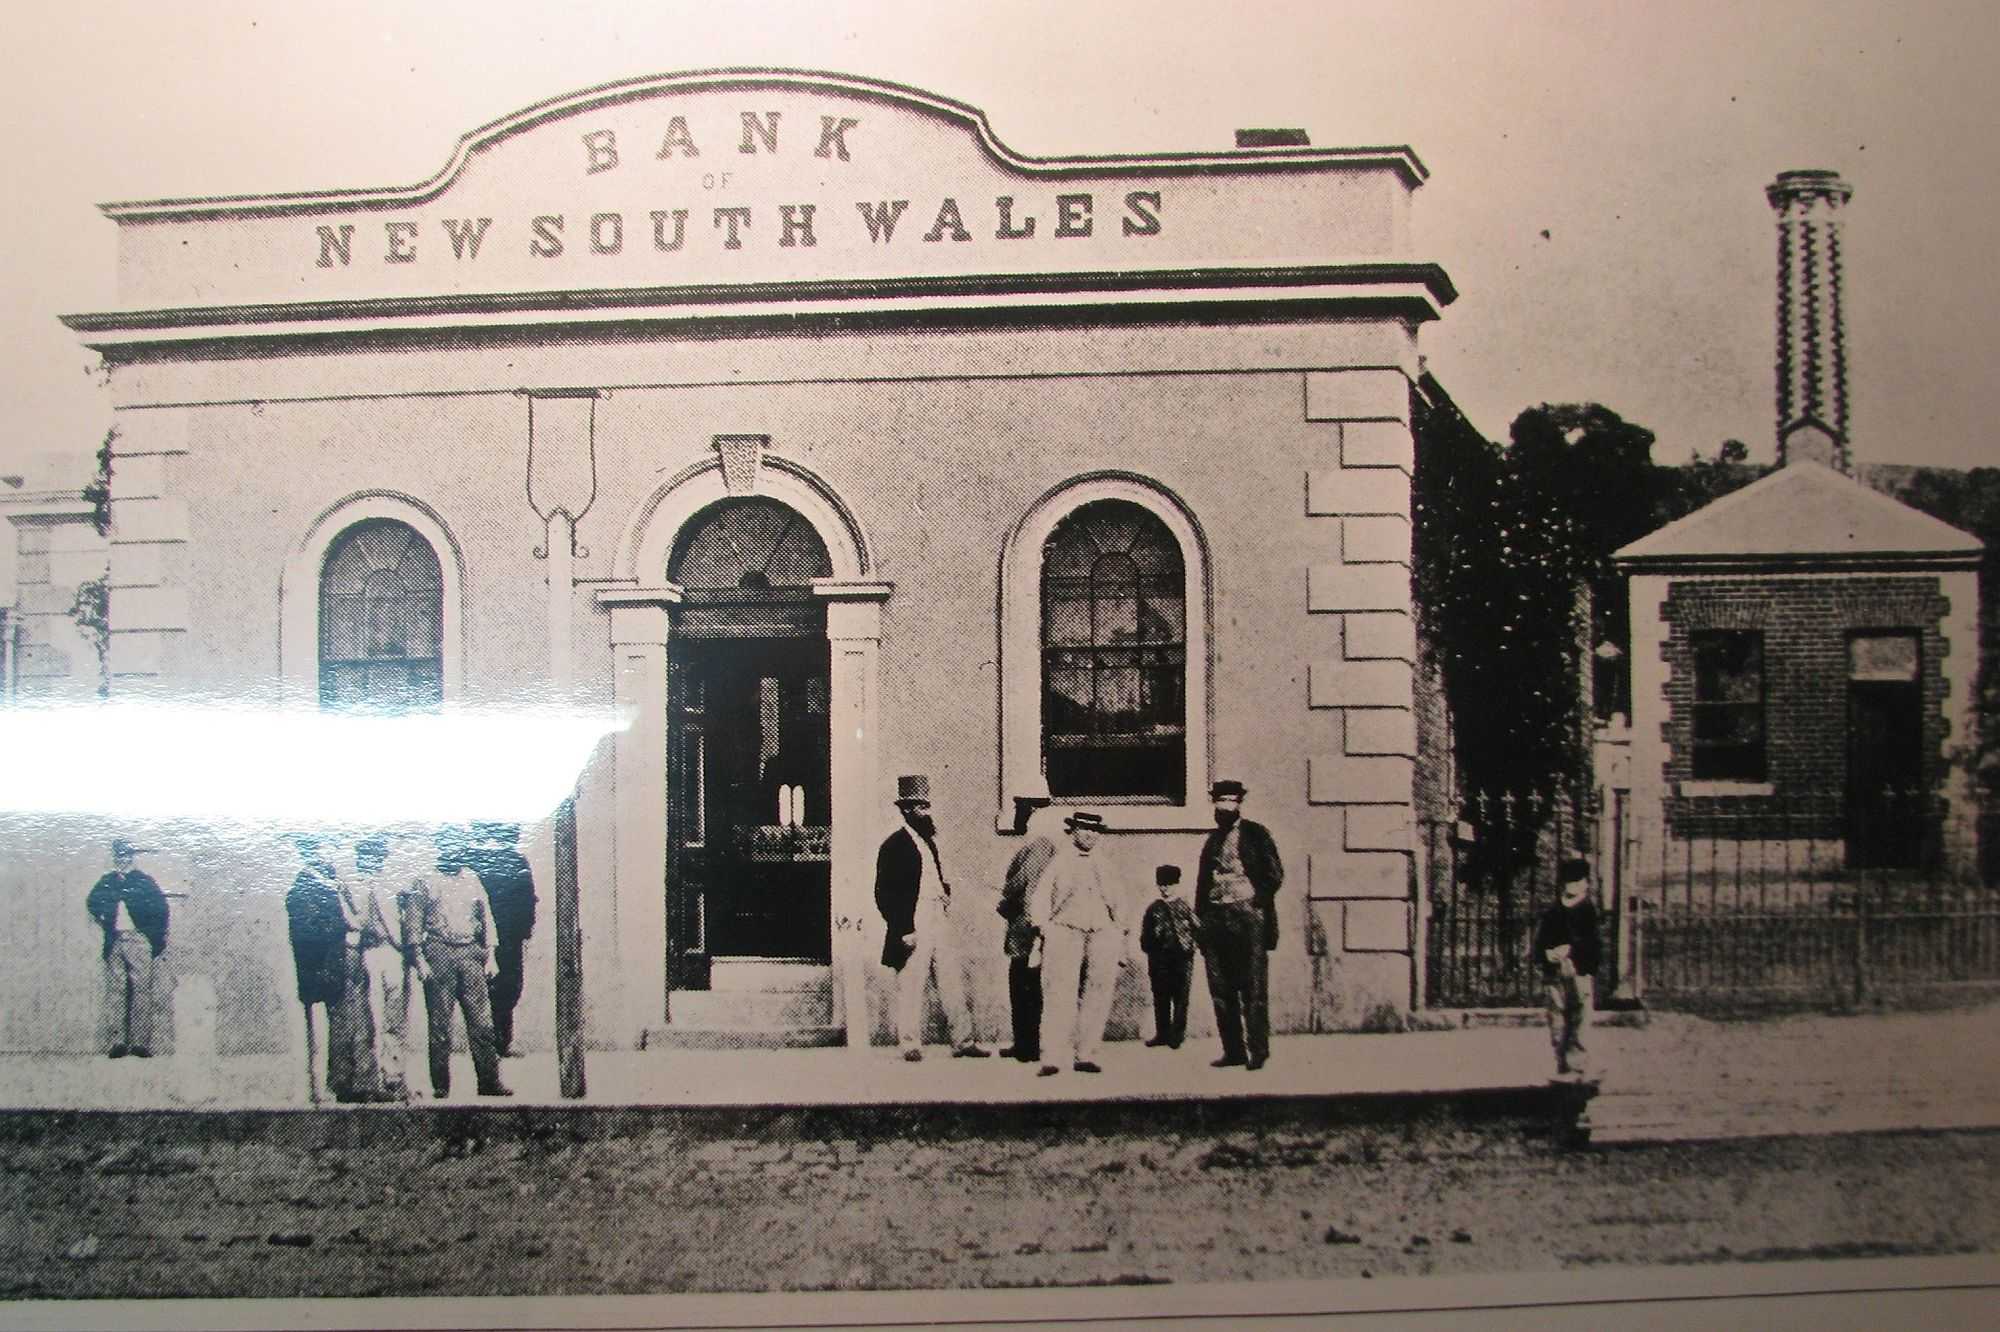 Bank of New South Wales, 1858